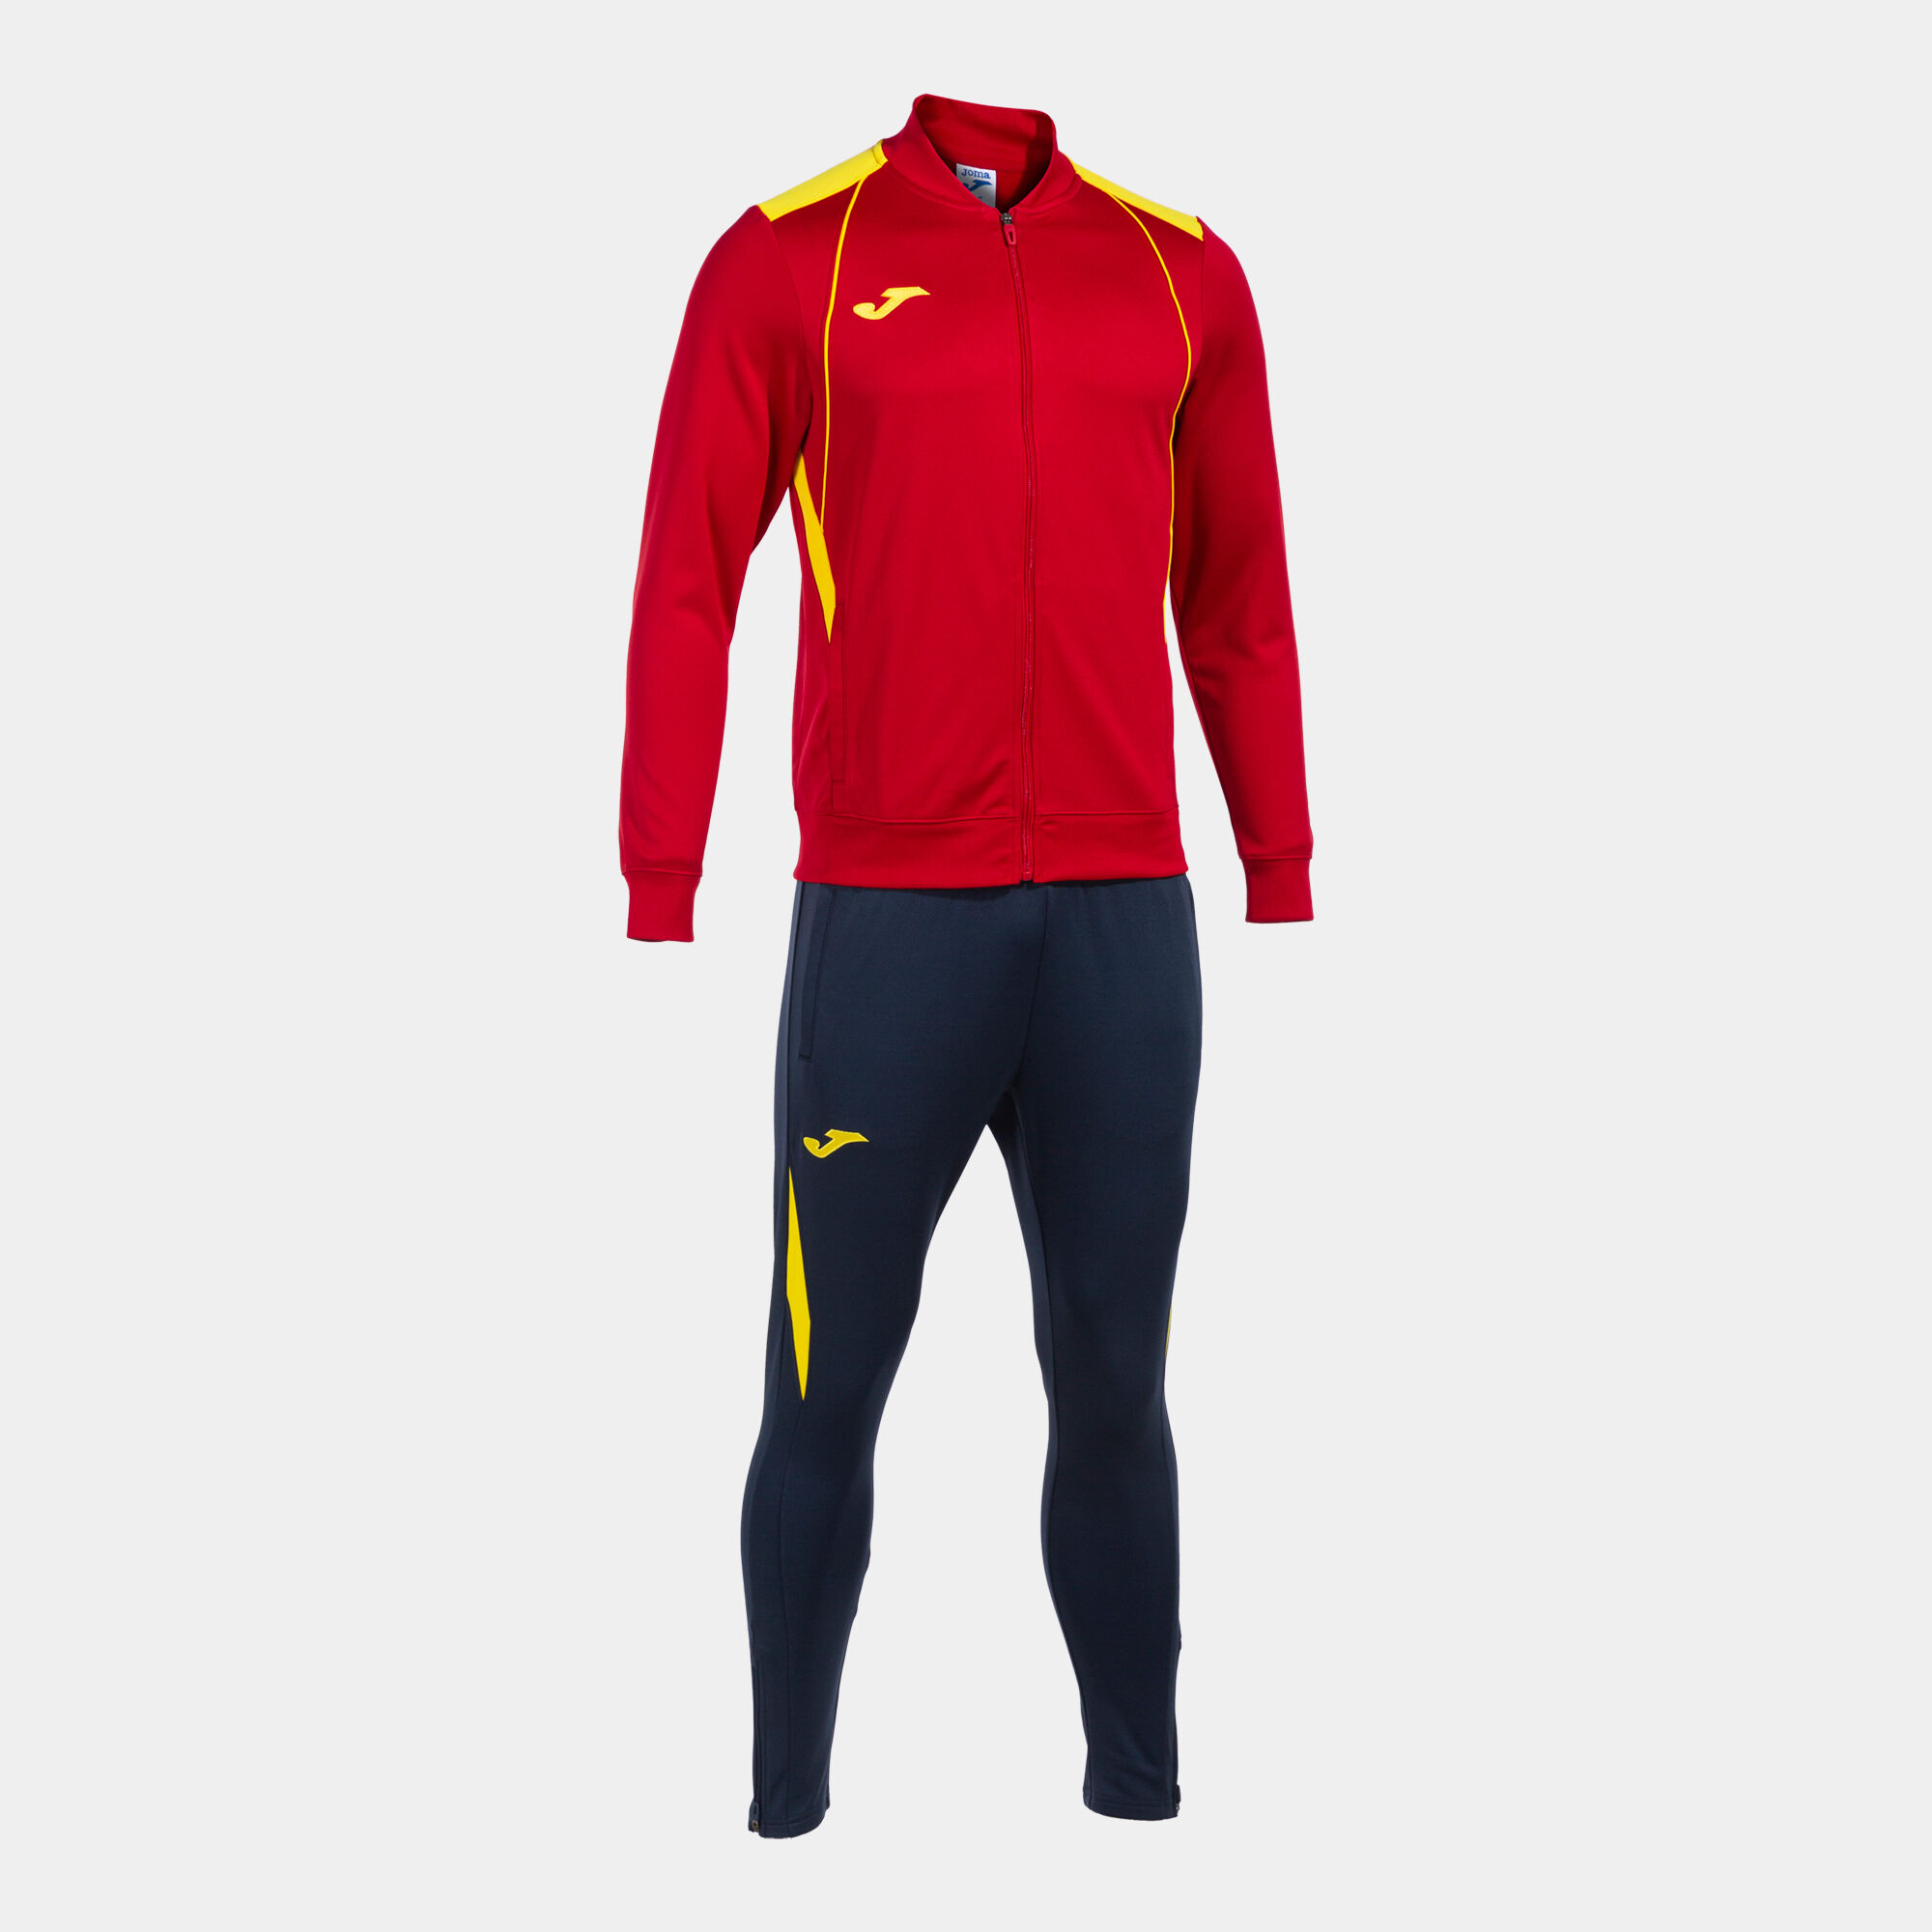 Tracksuit man Championship VII red yellow navy blue